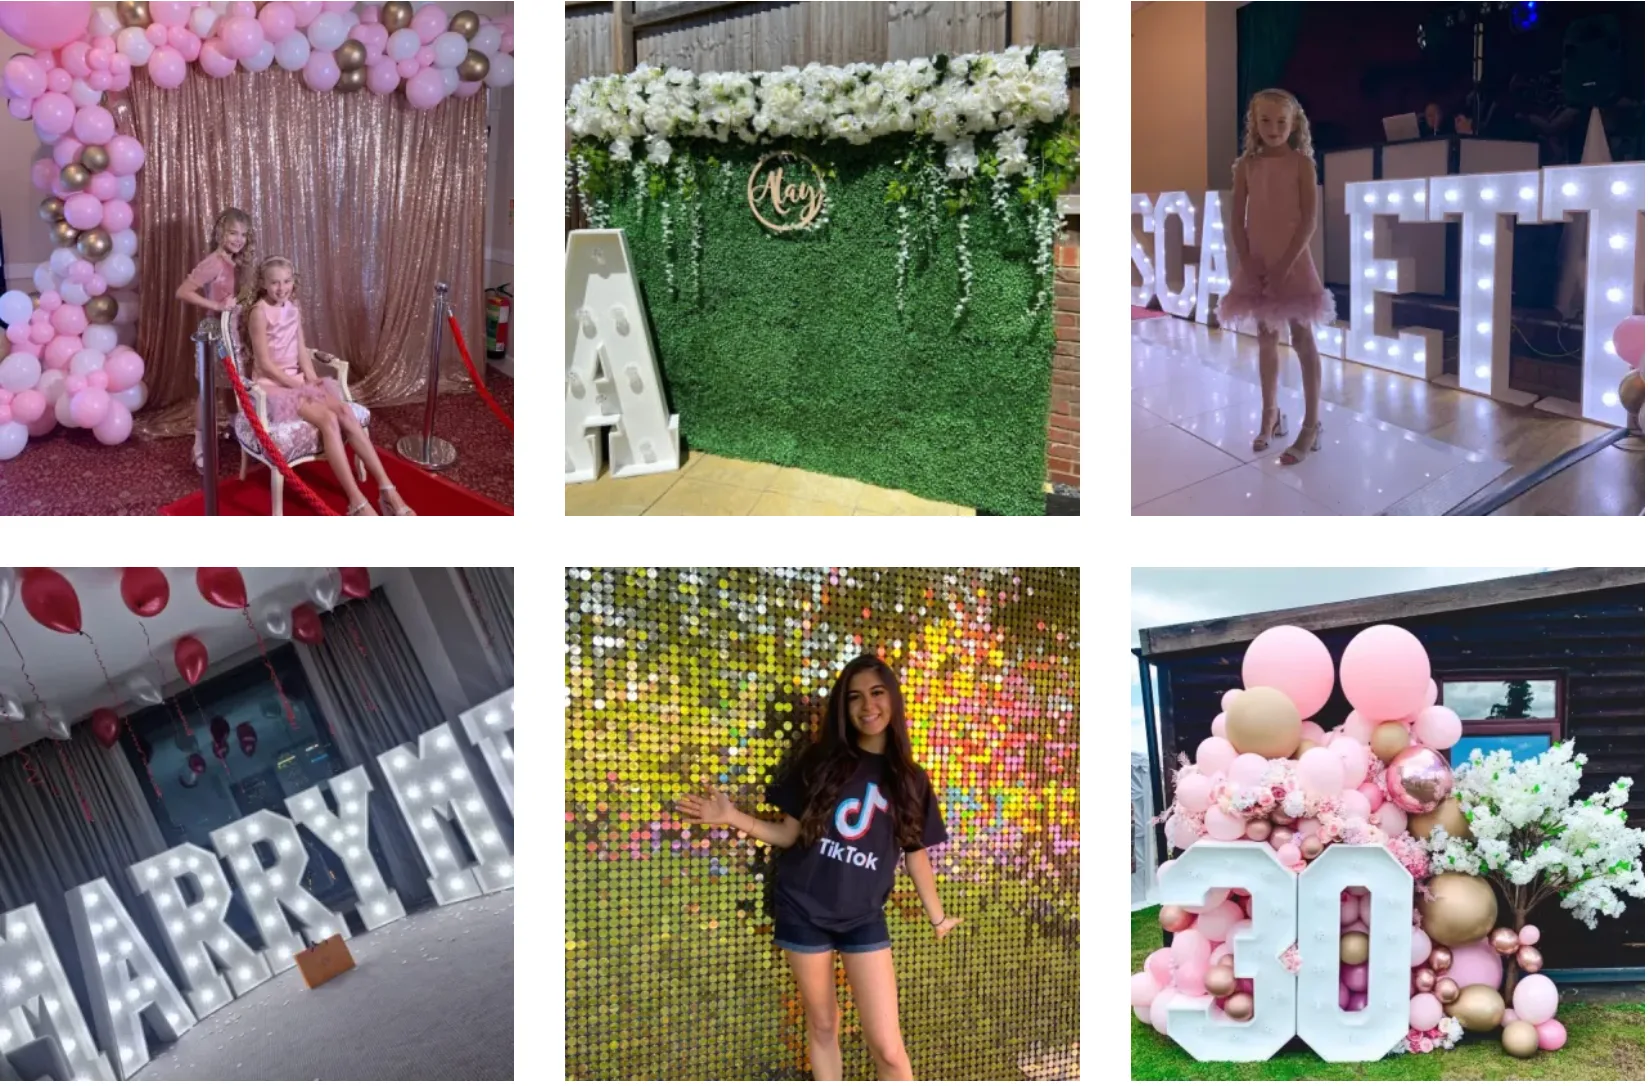 30th birthday decorations to hire, Children's party backdrop and colourful balloons, Pink sequin wall and hello gorgeous sign for a teenage party, Grass children's party backdrop with balloons and led number 1